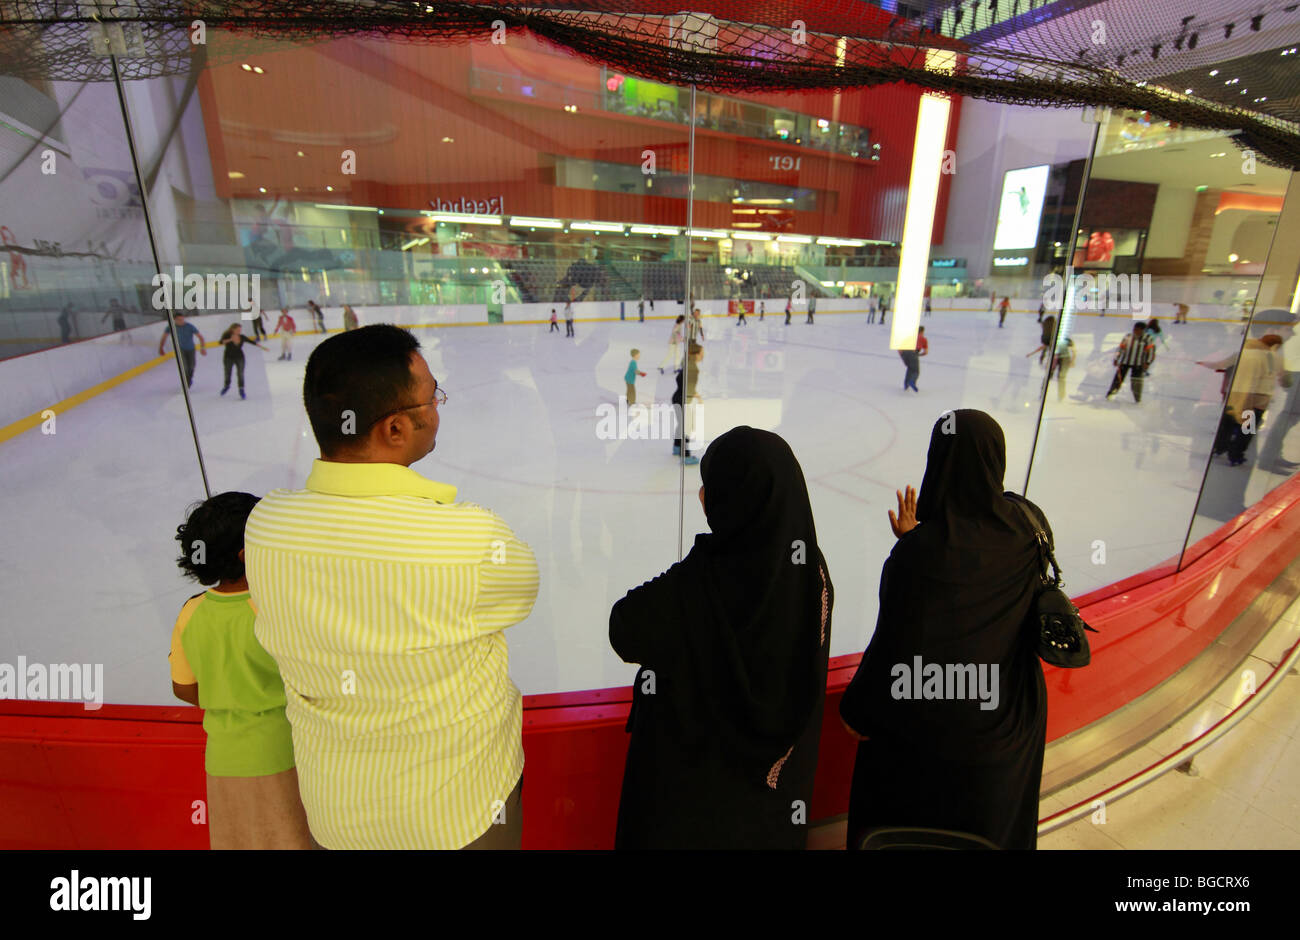 People on the ice rink in the Mall of Dubai, United Arab Emirates Stock Photo